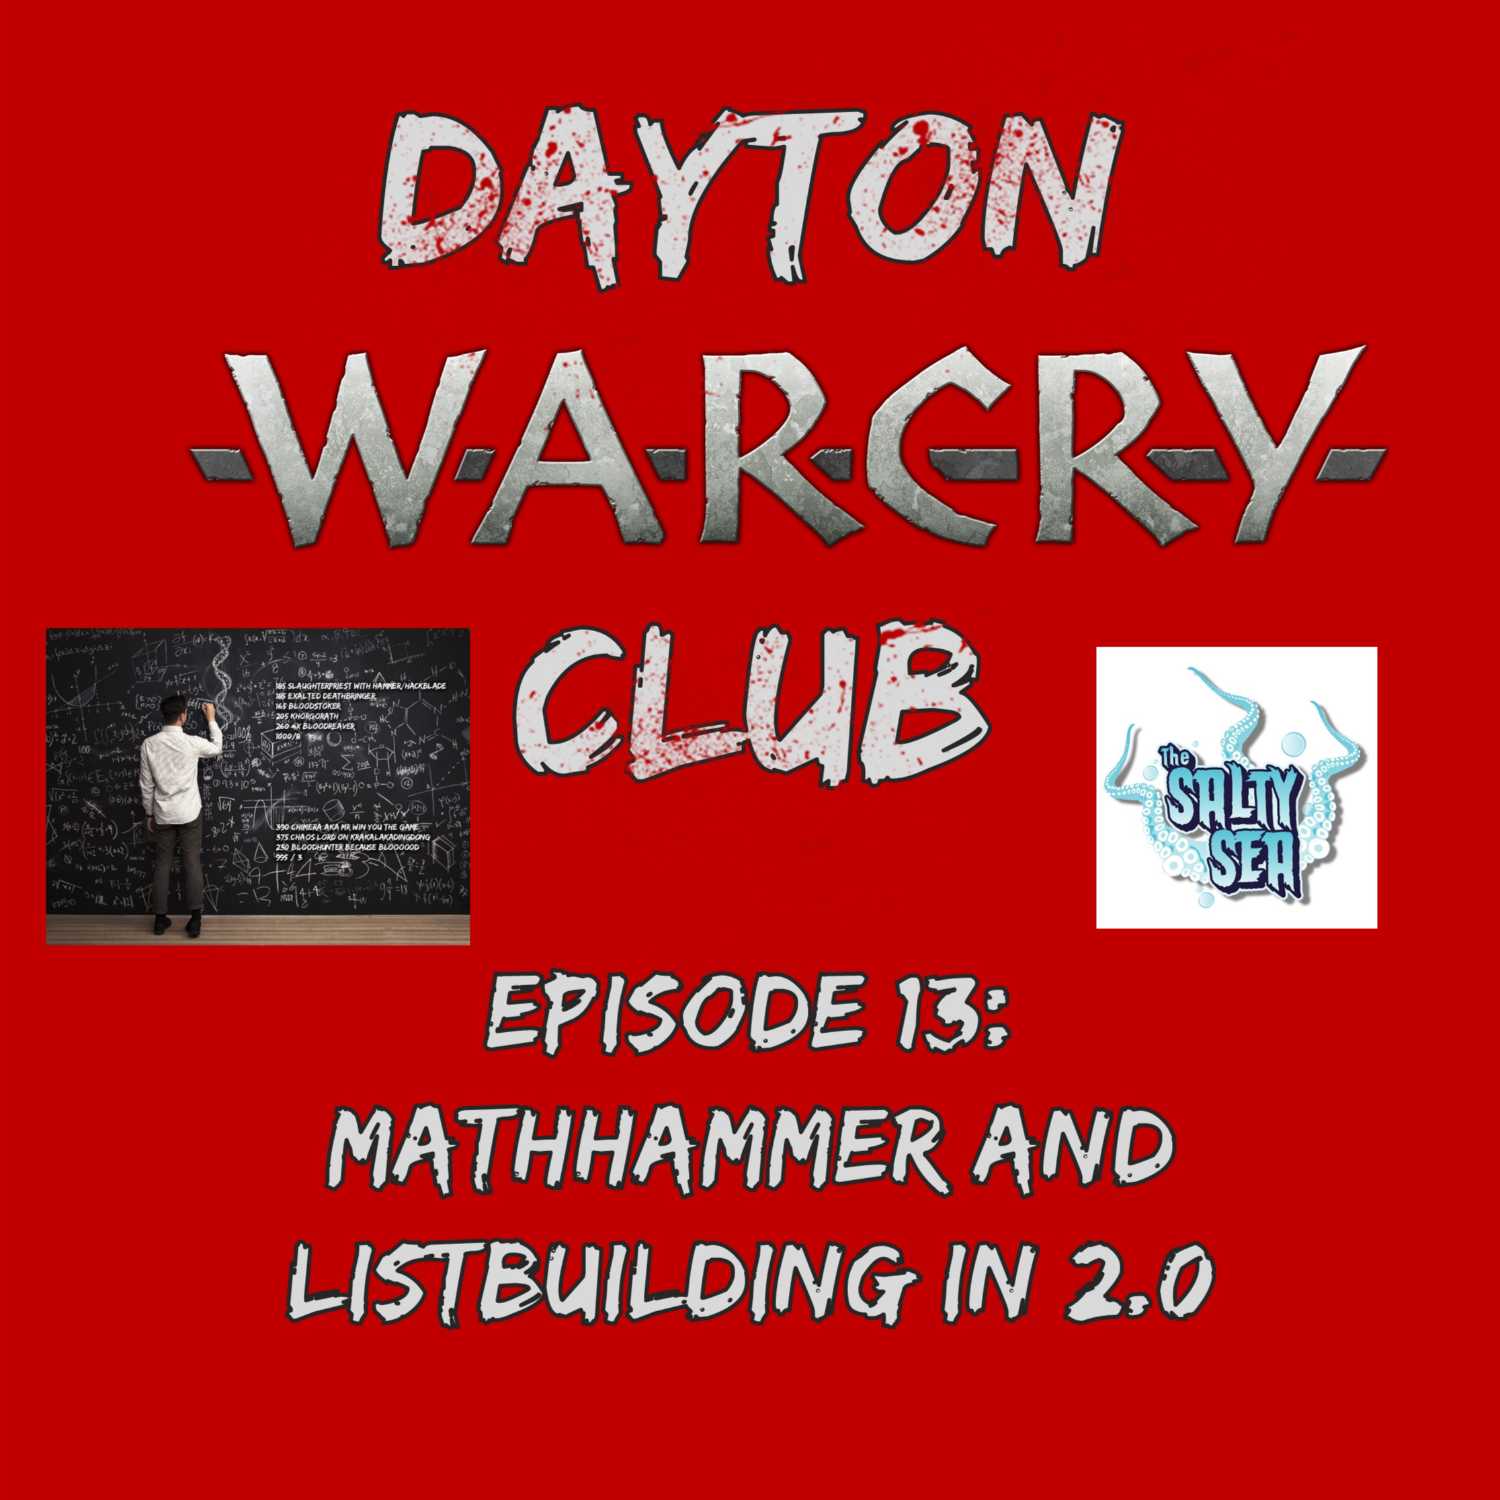 Dayton Warcry Club Episode 13: MathHammer and Listbuilding in 2.0